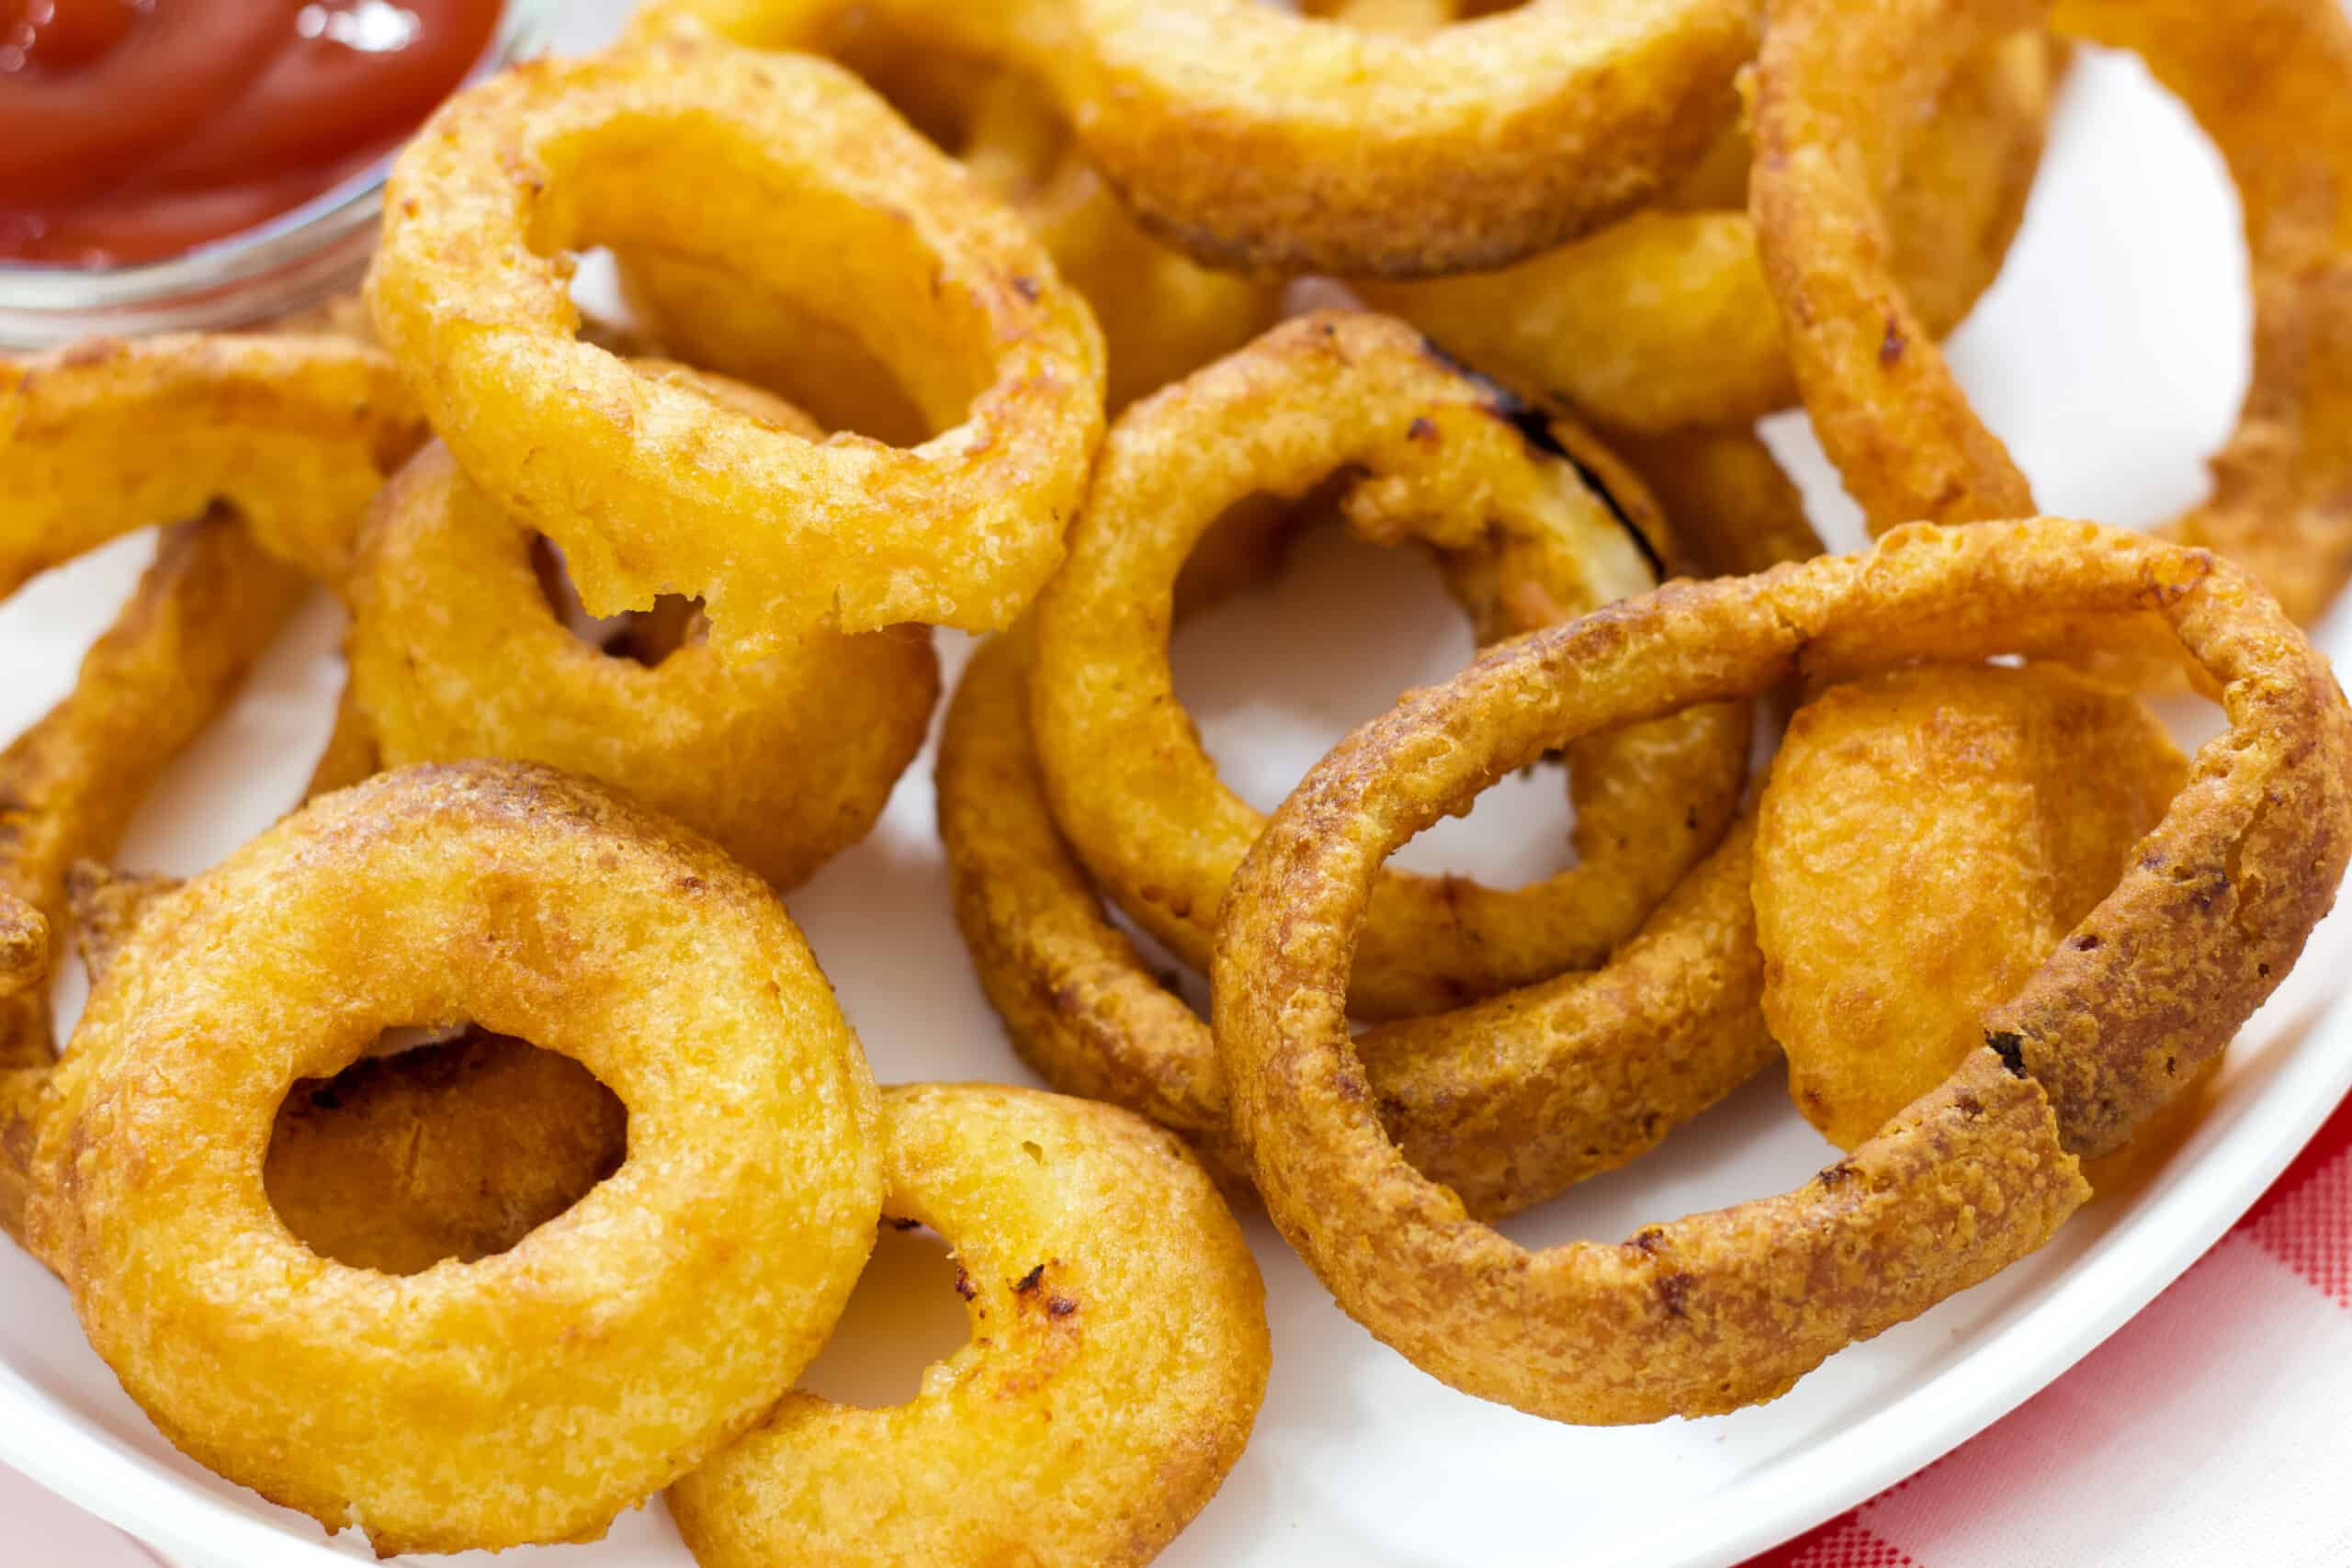 close up of the onion rings on a white plastic plate with a bowl of ketchup in the top left corner of the image.